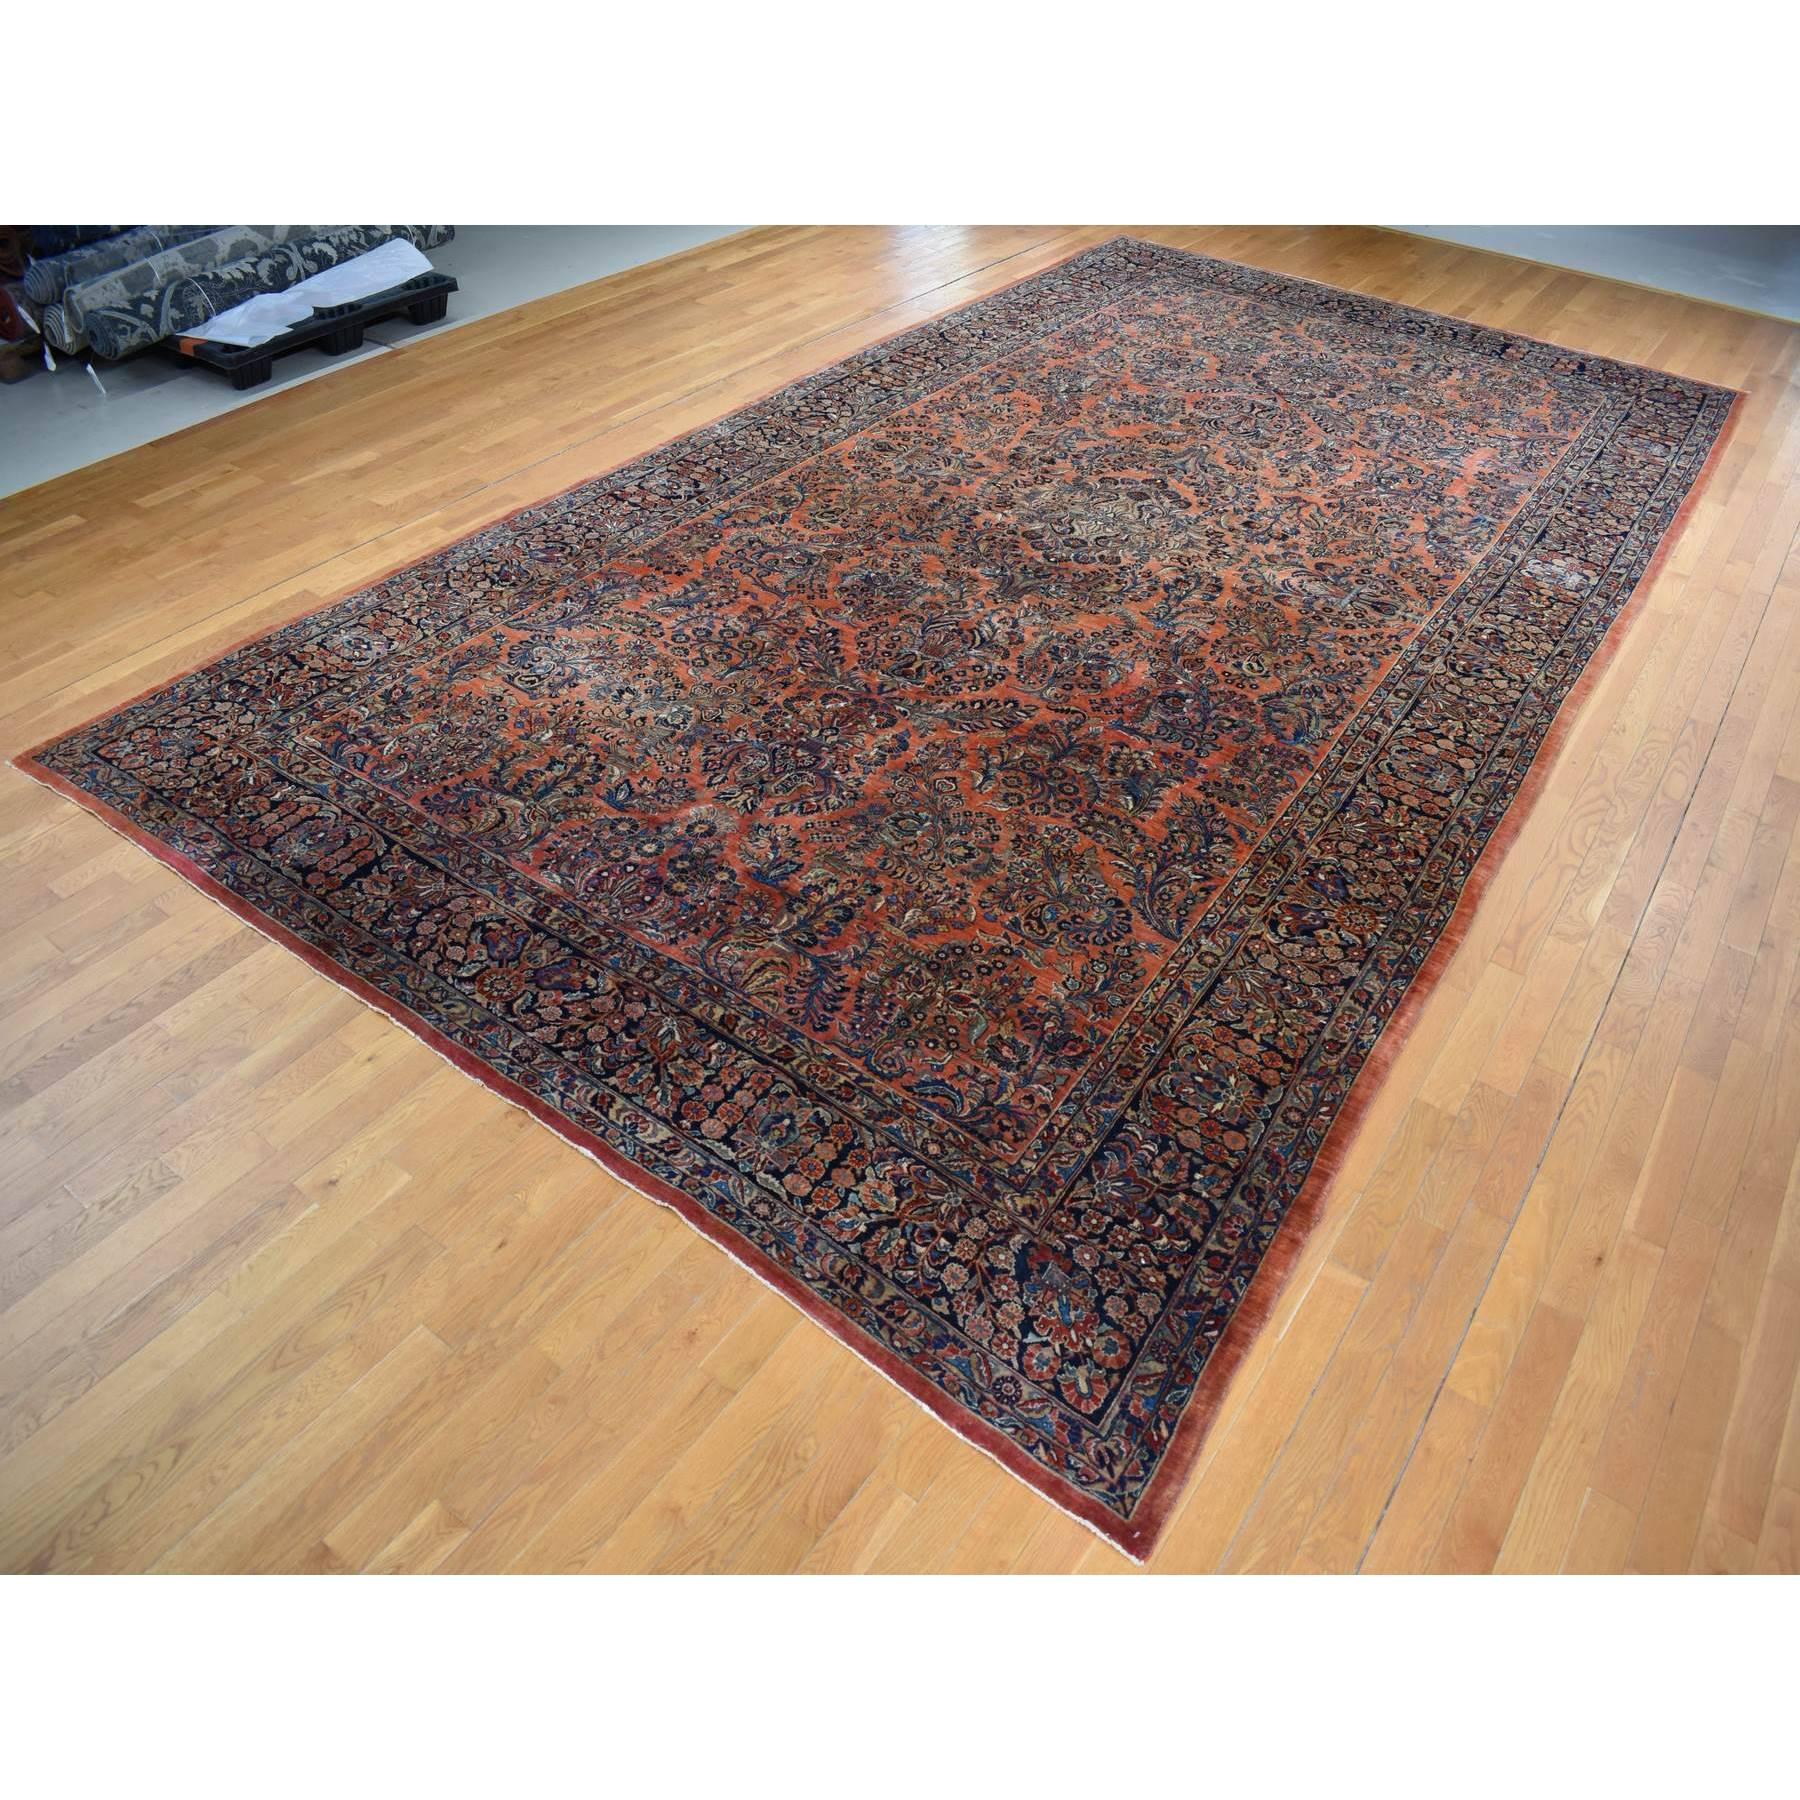 Medieval Red Antique Persian Sarouk Pure Wool Full Pile Hand Knotted Clean and Soft Rug For Sale